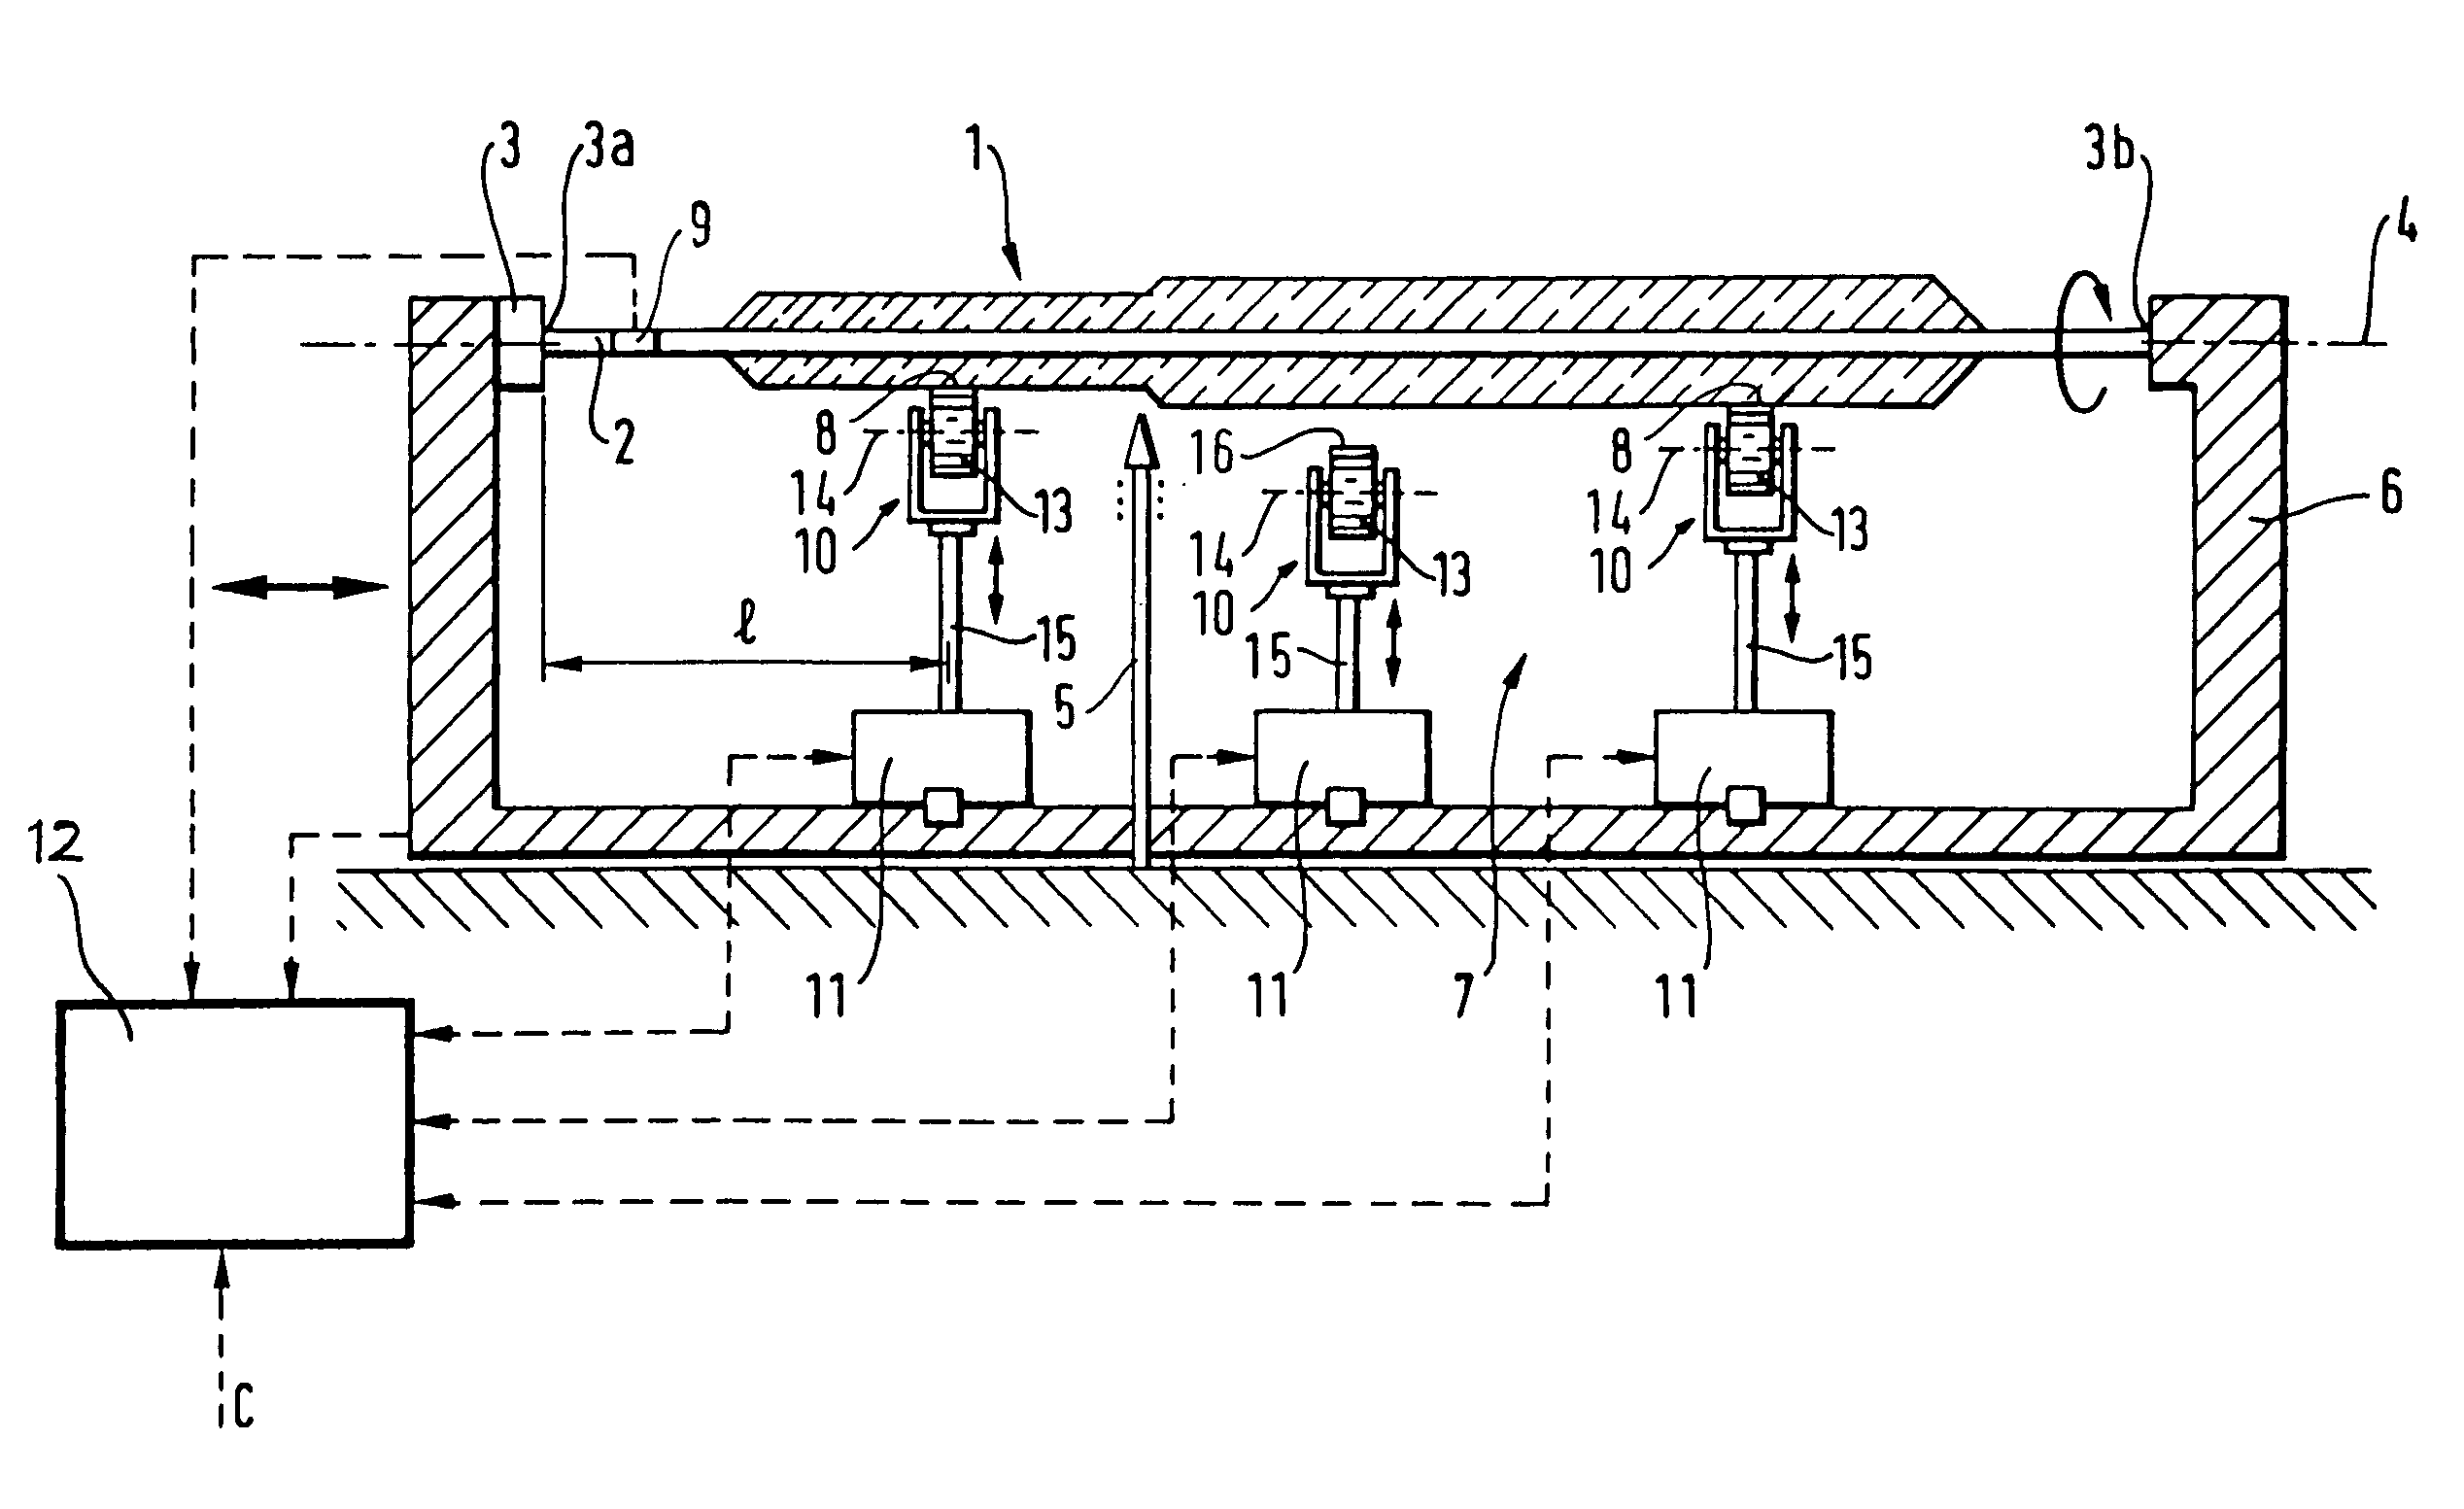 Apparatus for supporting a preform having a supporting core